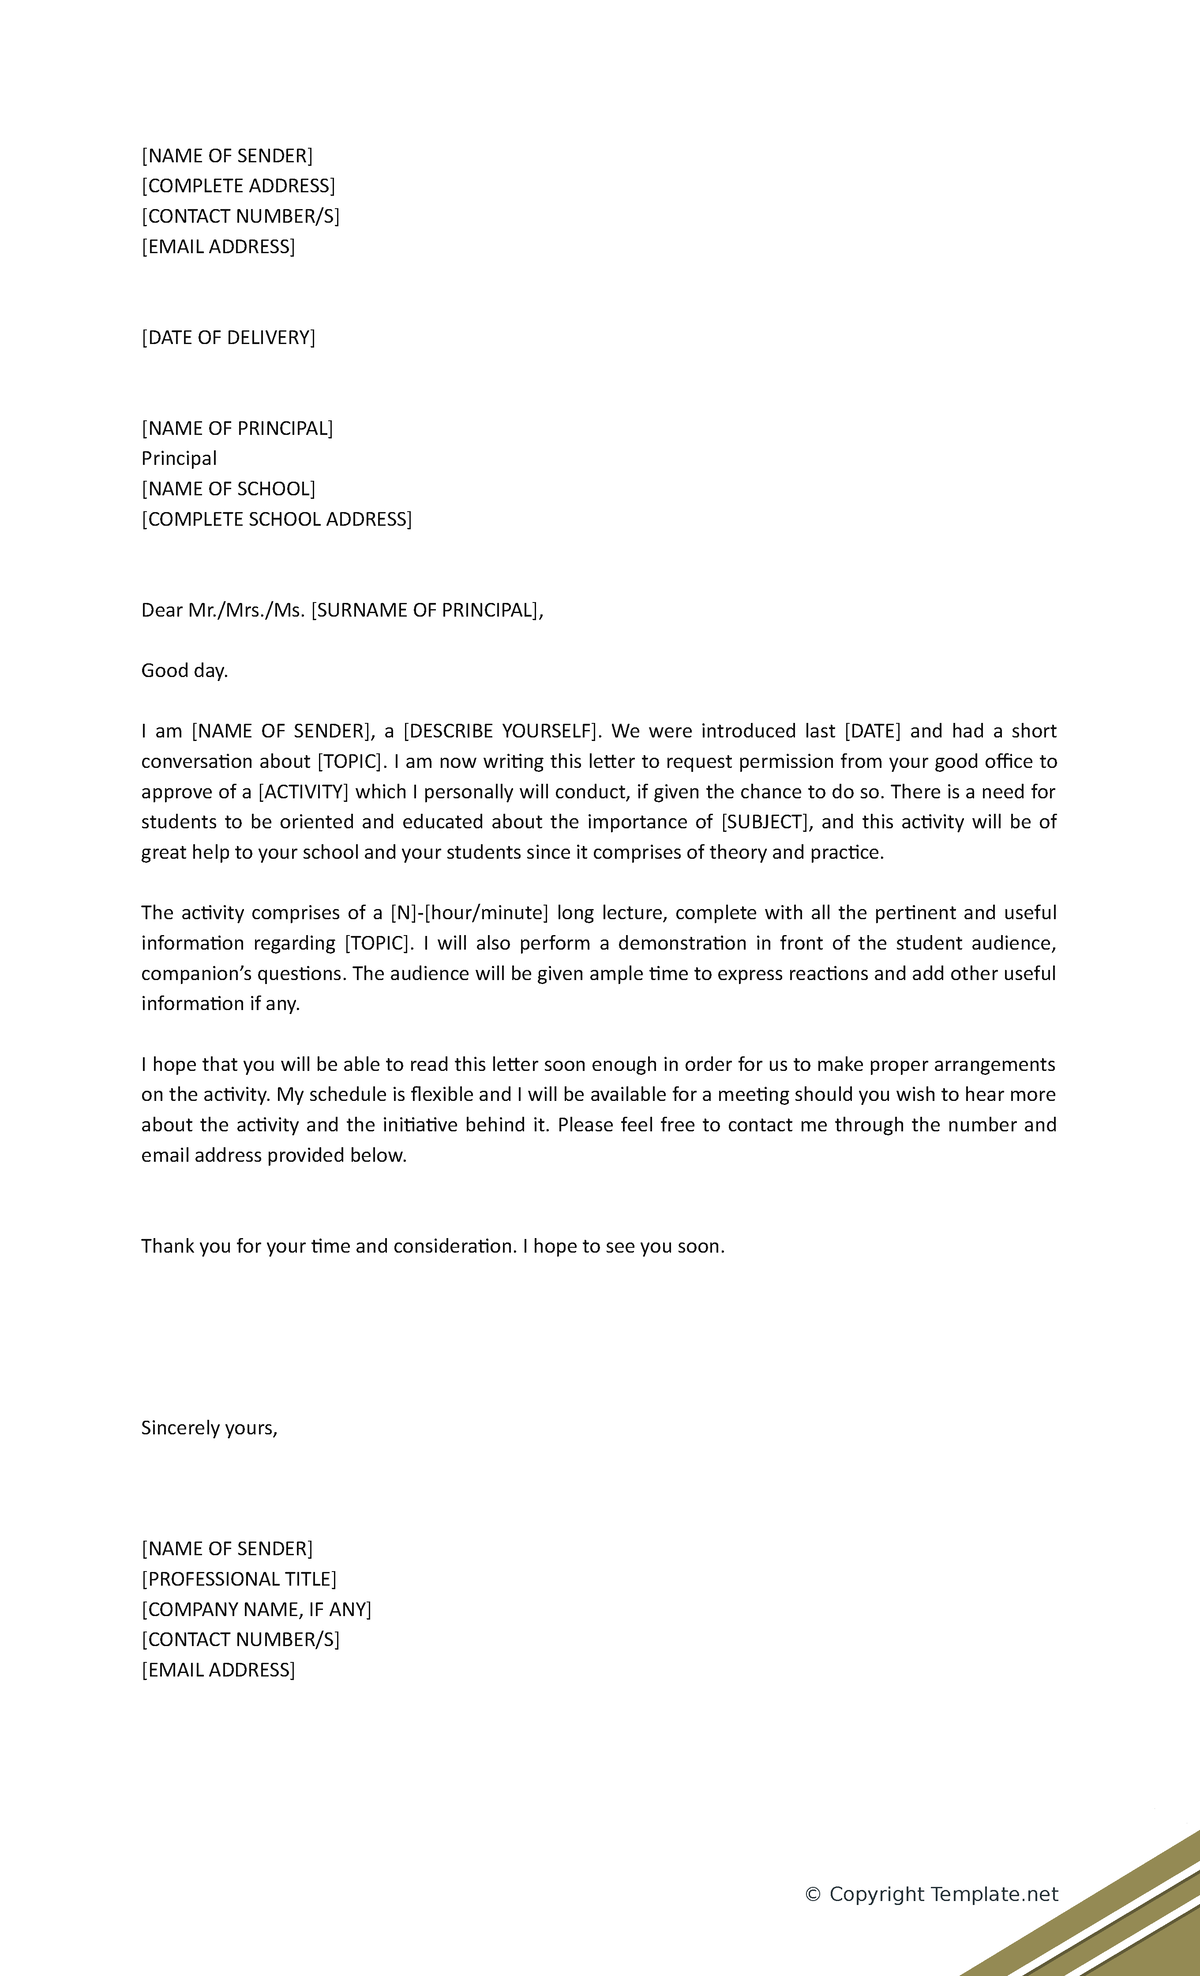 Business Letter Template - [NAME OF SENDER] [COMPLETE ADDRESS] [CONTACT ...